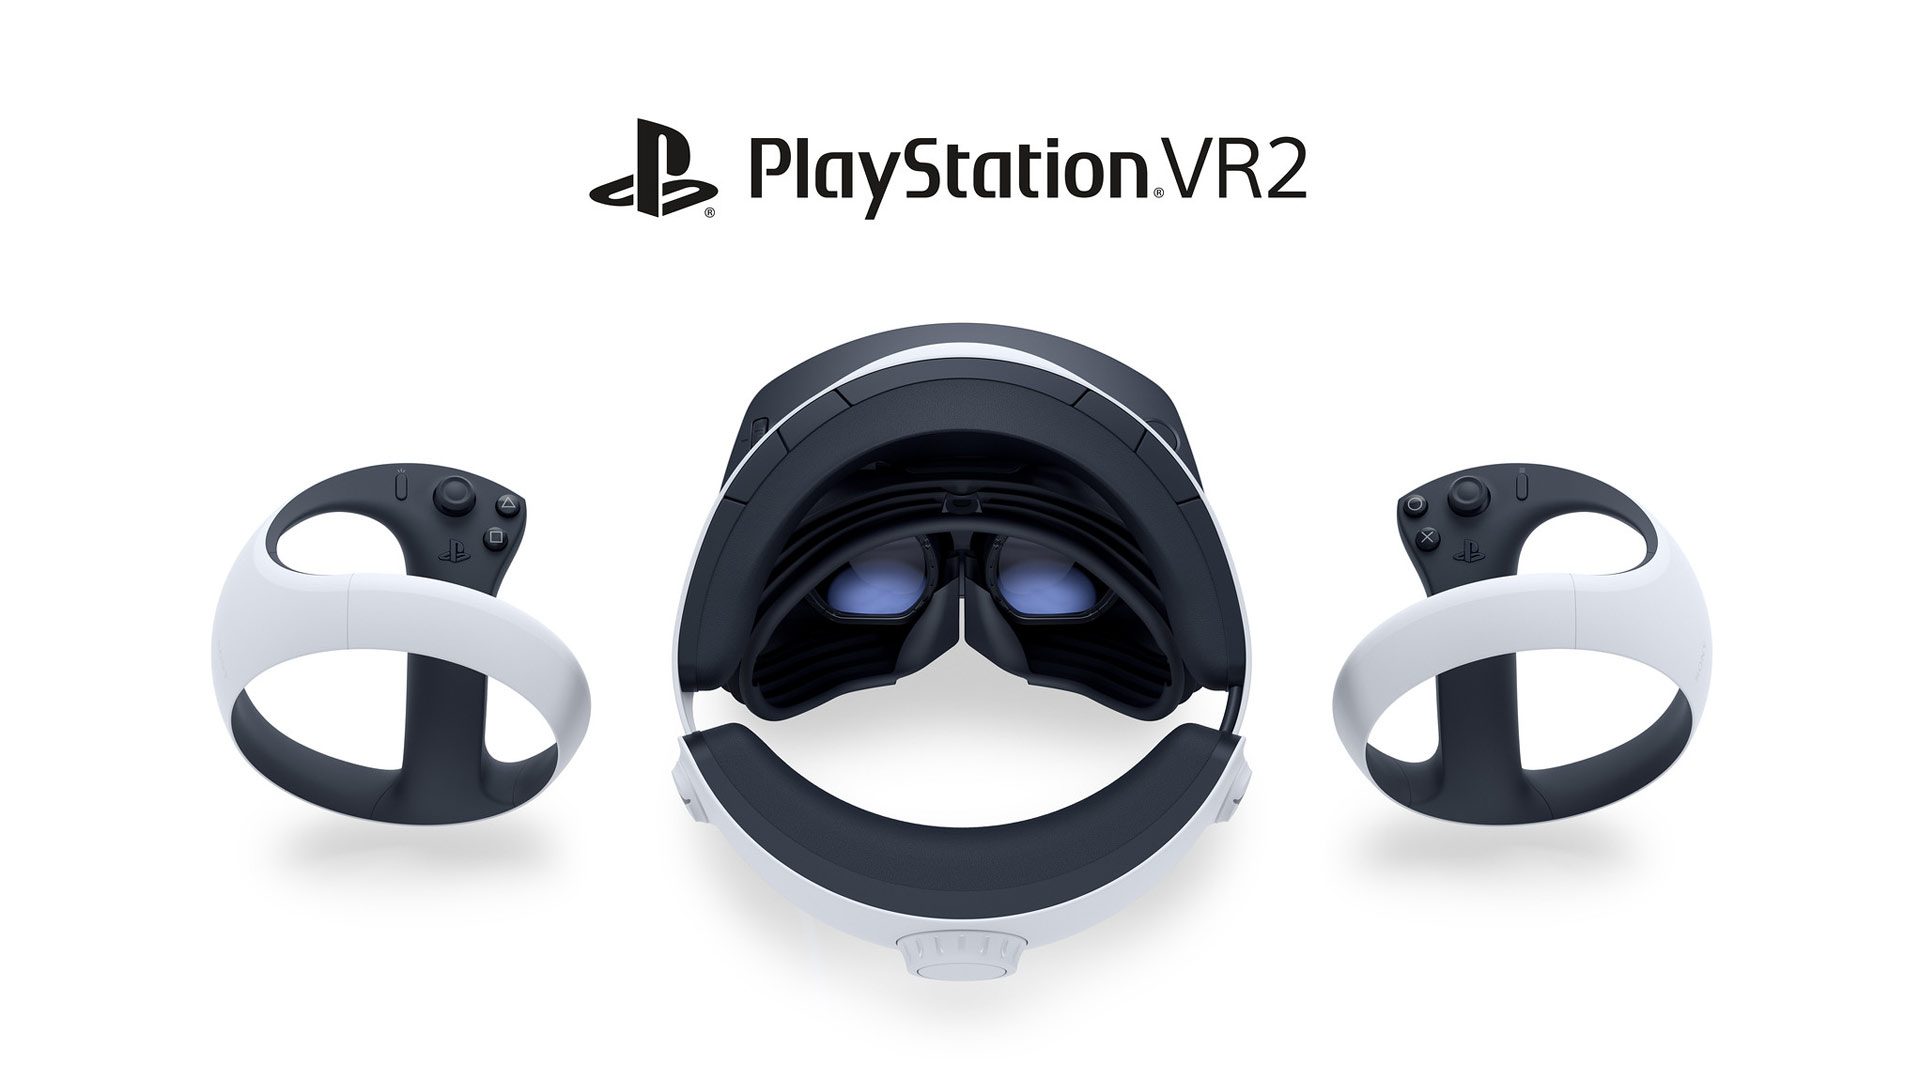 PSVR 2 is still some way from being ready, and could be mega expensive